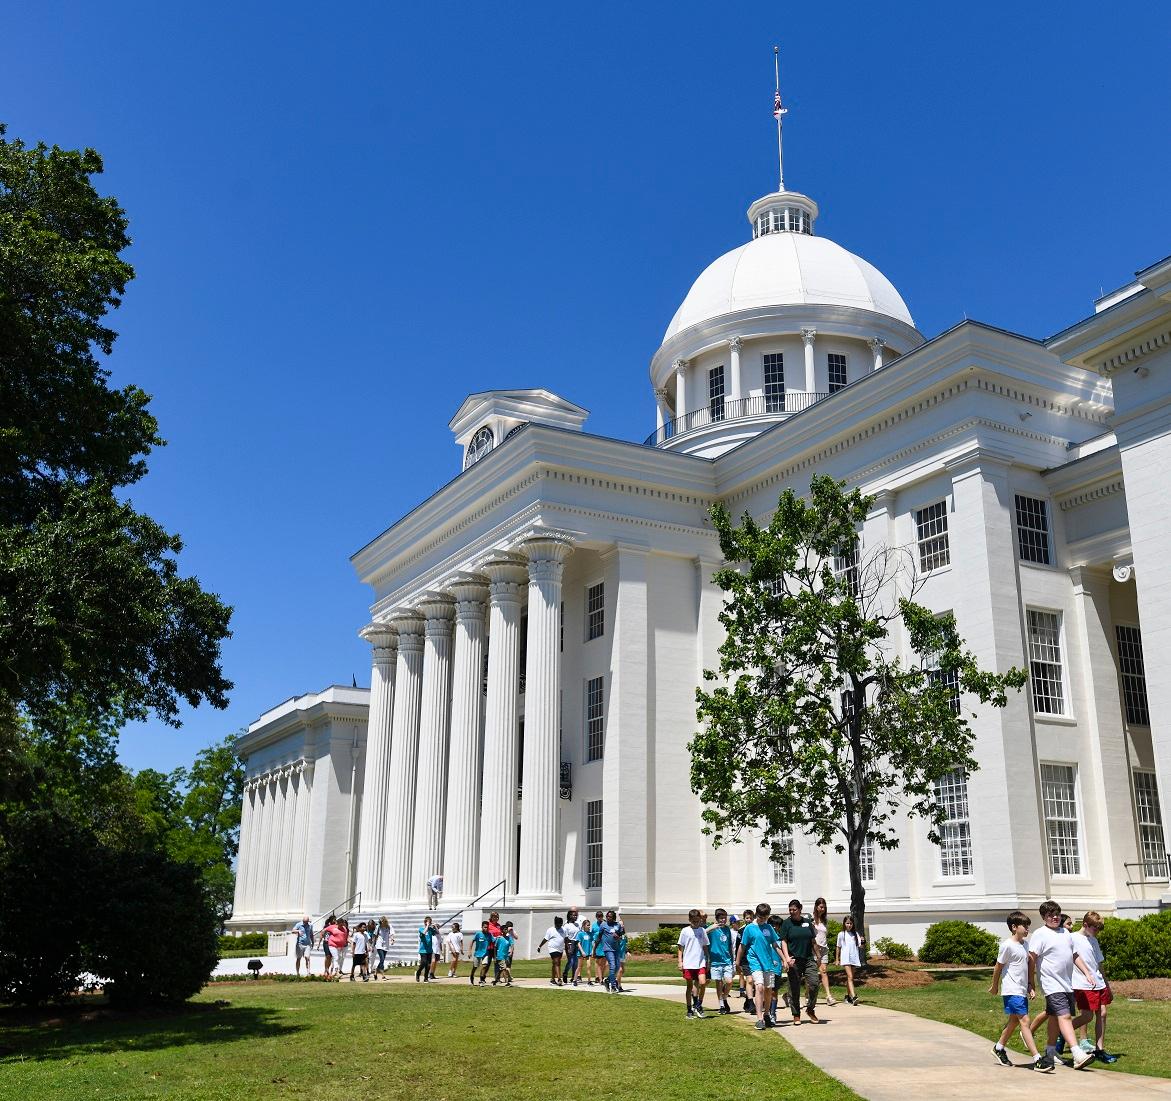 A school group walks the grounds of the Alabama State Capitol in Montgomery, Ala., on May 15. (Julie Bennett/Getty Images)